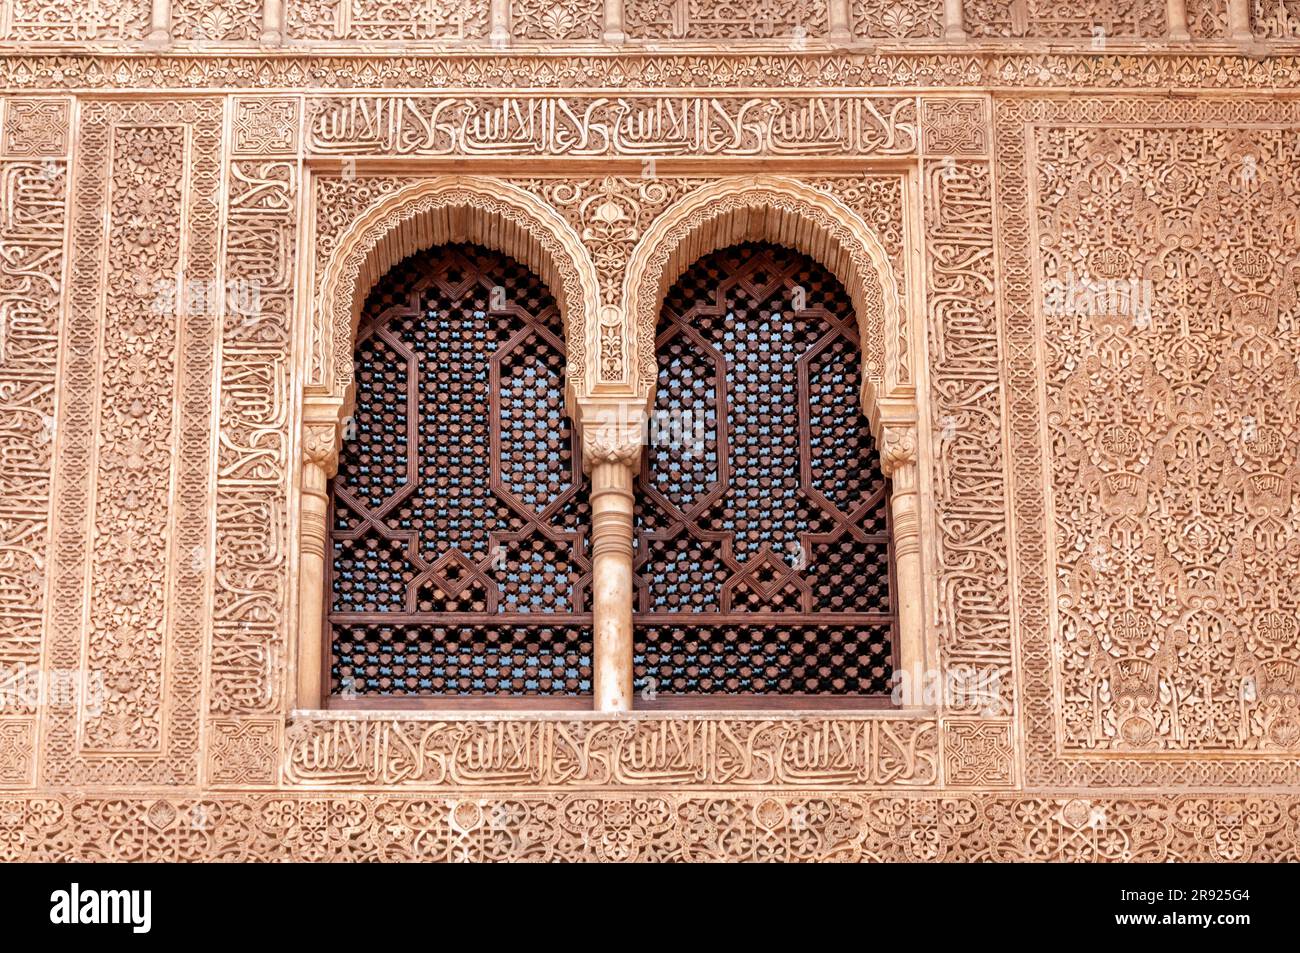 Islamic calligraphy on a window frame with floral designs Stock Photo